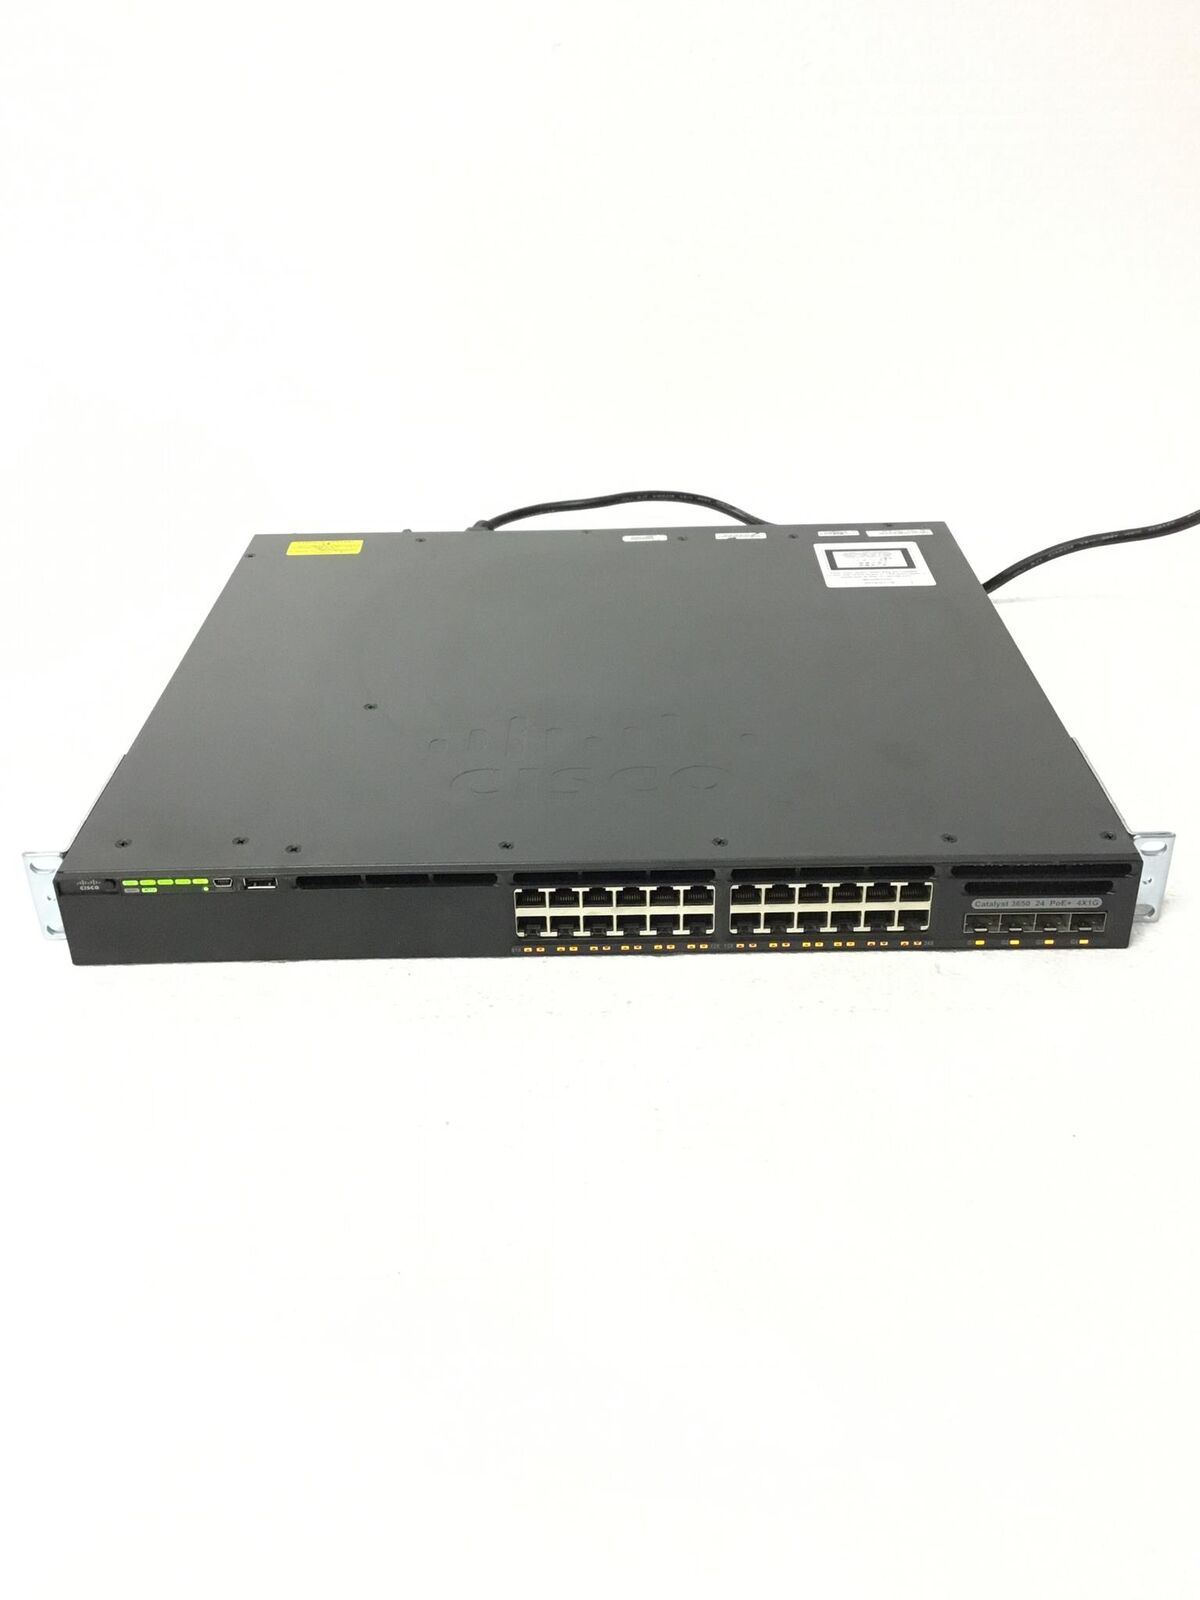 CISCO CATALYST 3650 WS-C3650-24PS-S 24 Poe+ 4X1G Network Switch w/PS.Rack Ears